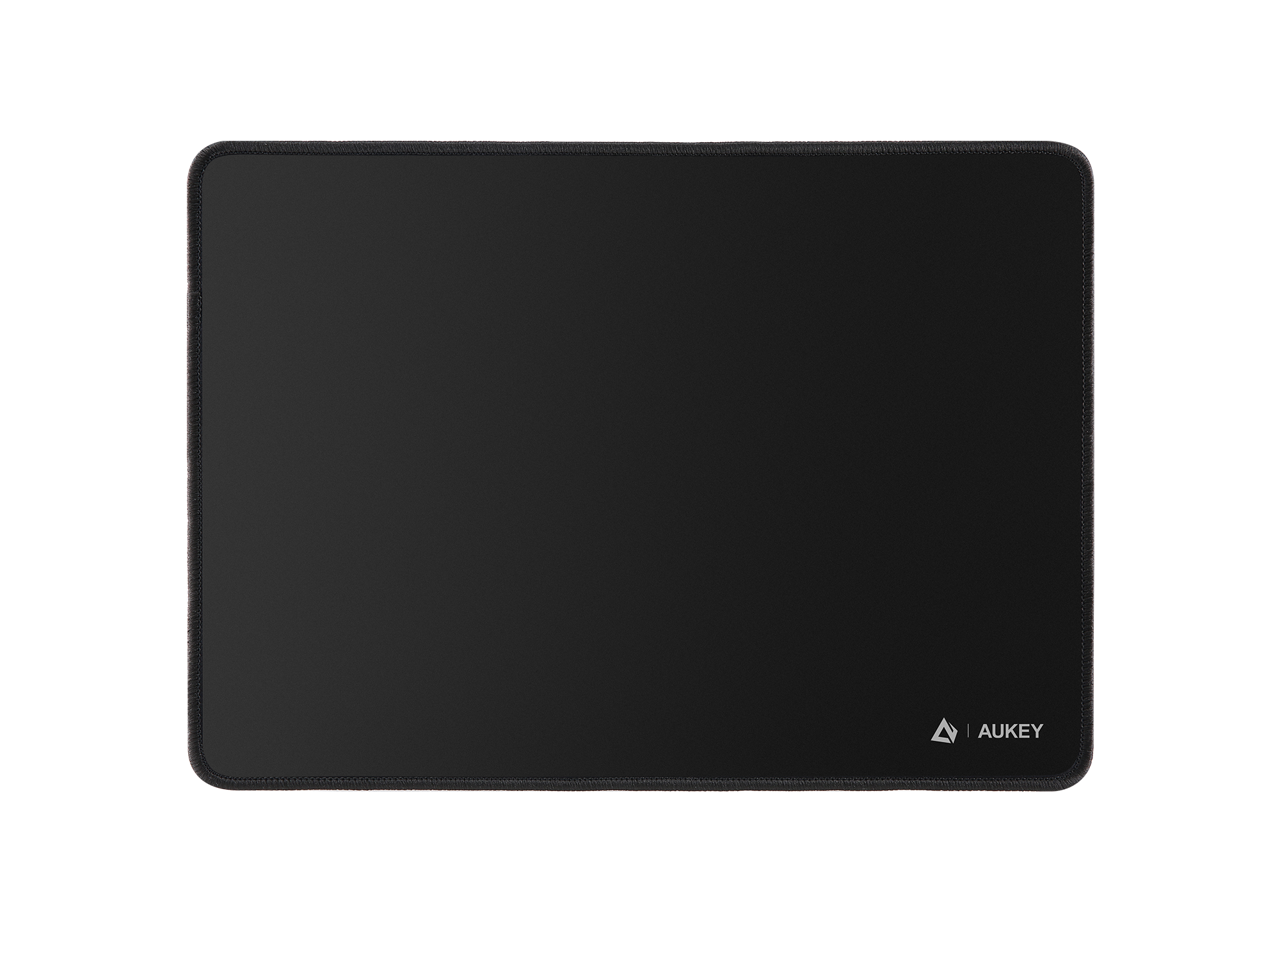 AUKEY Mouse Pad, Gaming Mouse Mat with Smooth Surface, Non-Slip Rubber Base and Anti-Fraying Stitched Edges 13.7” x 9.8”-KM-P1